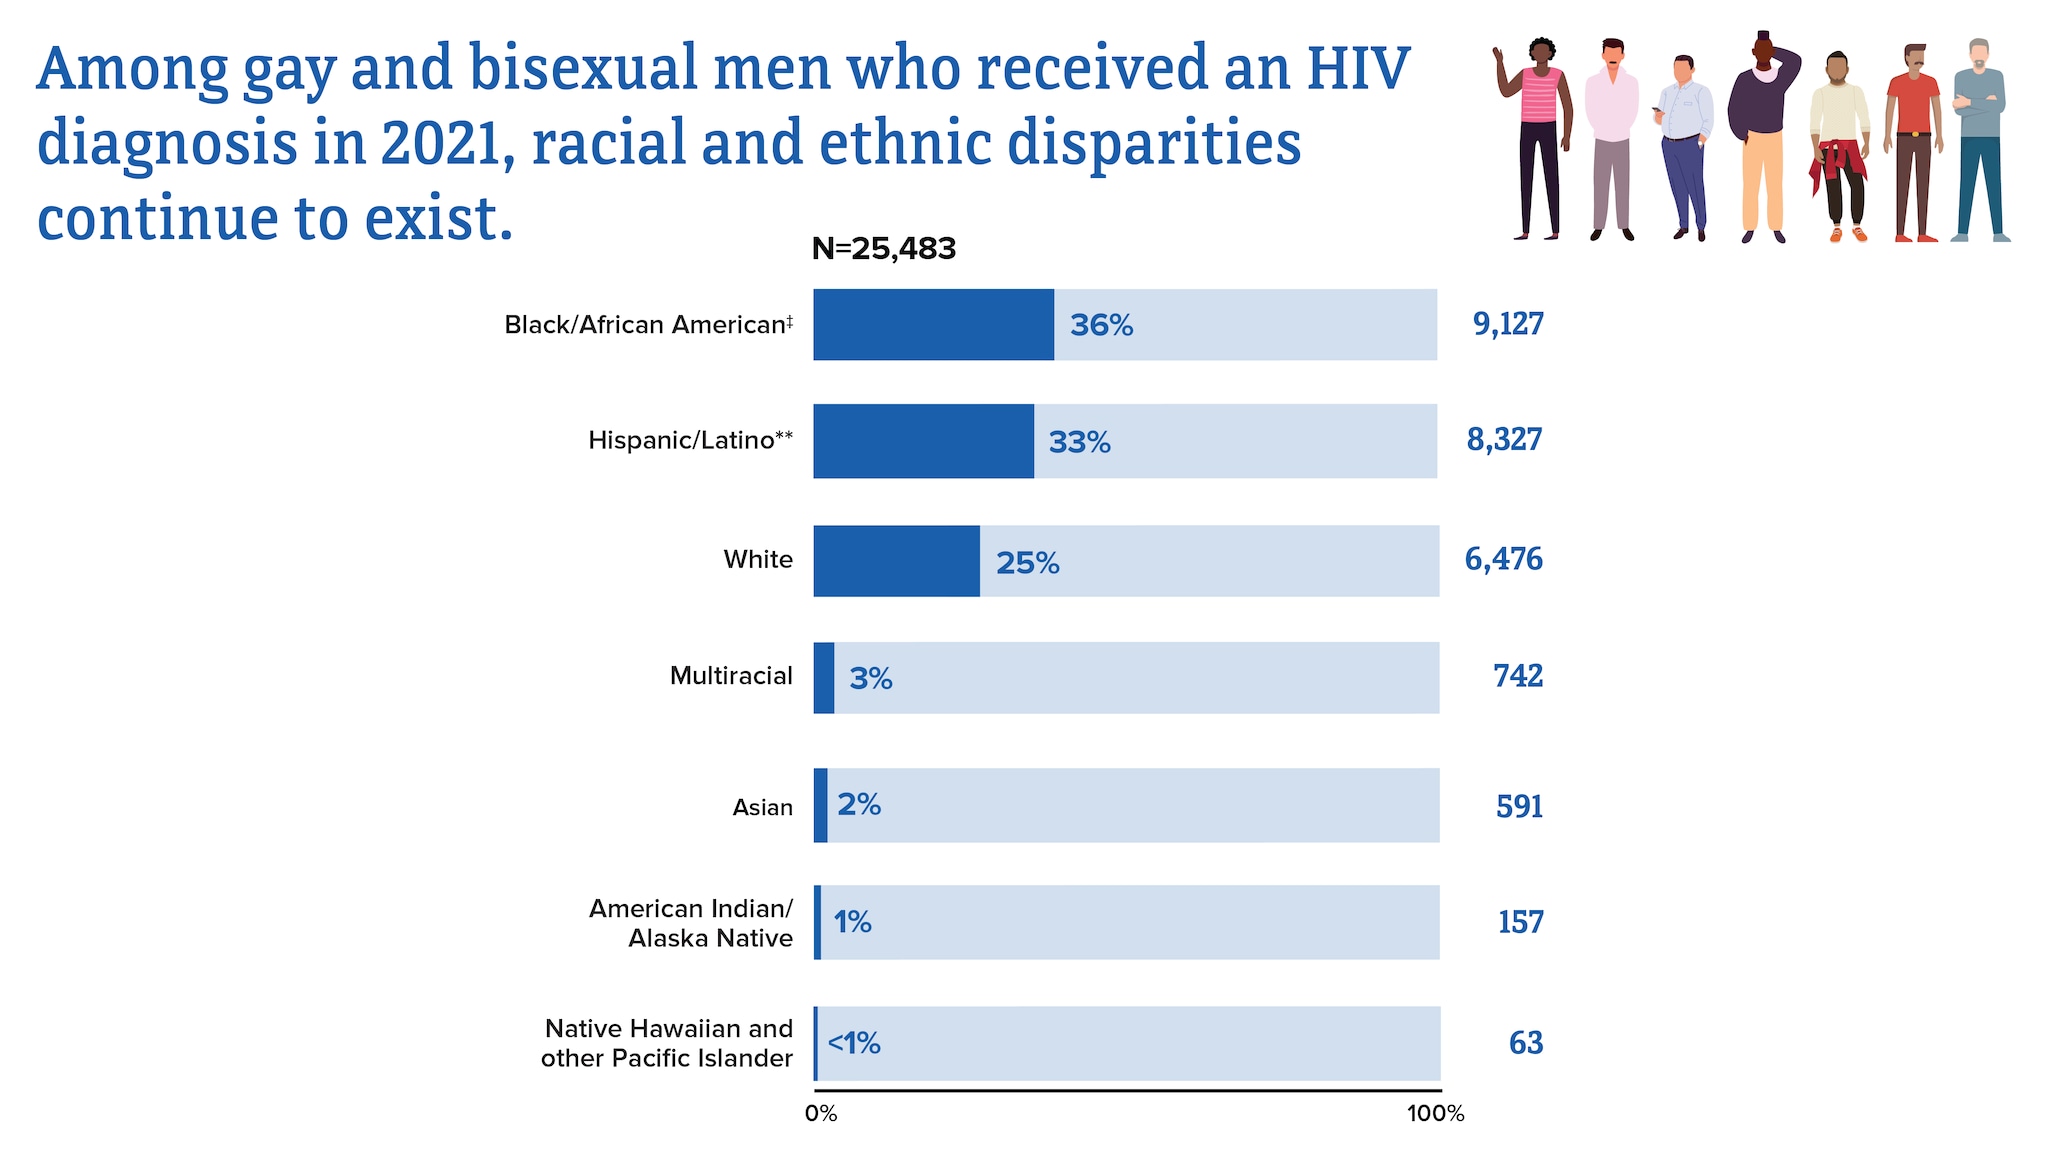 Among gay and bisexual men who received an HIV diagnosis in 2021, racial and ethnic disparities continue to exist. Black/African American people had the most diagnoses, followed by Hispanic/Latino, White, multiracial, Asian, American Indian/Alaska Native, and Native Hawaiian and other Pacific Islander people, respectively.